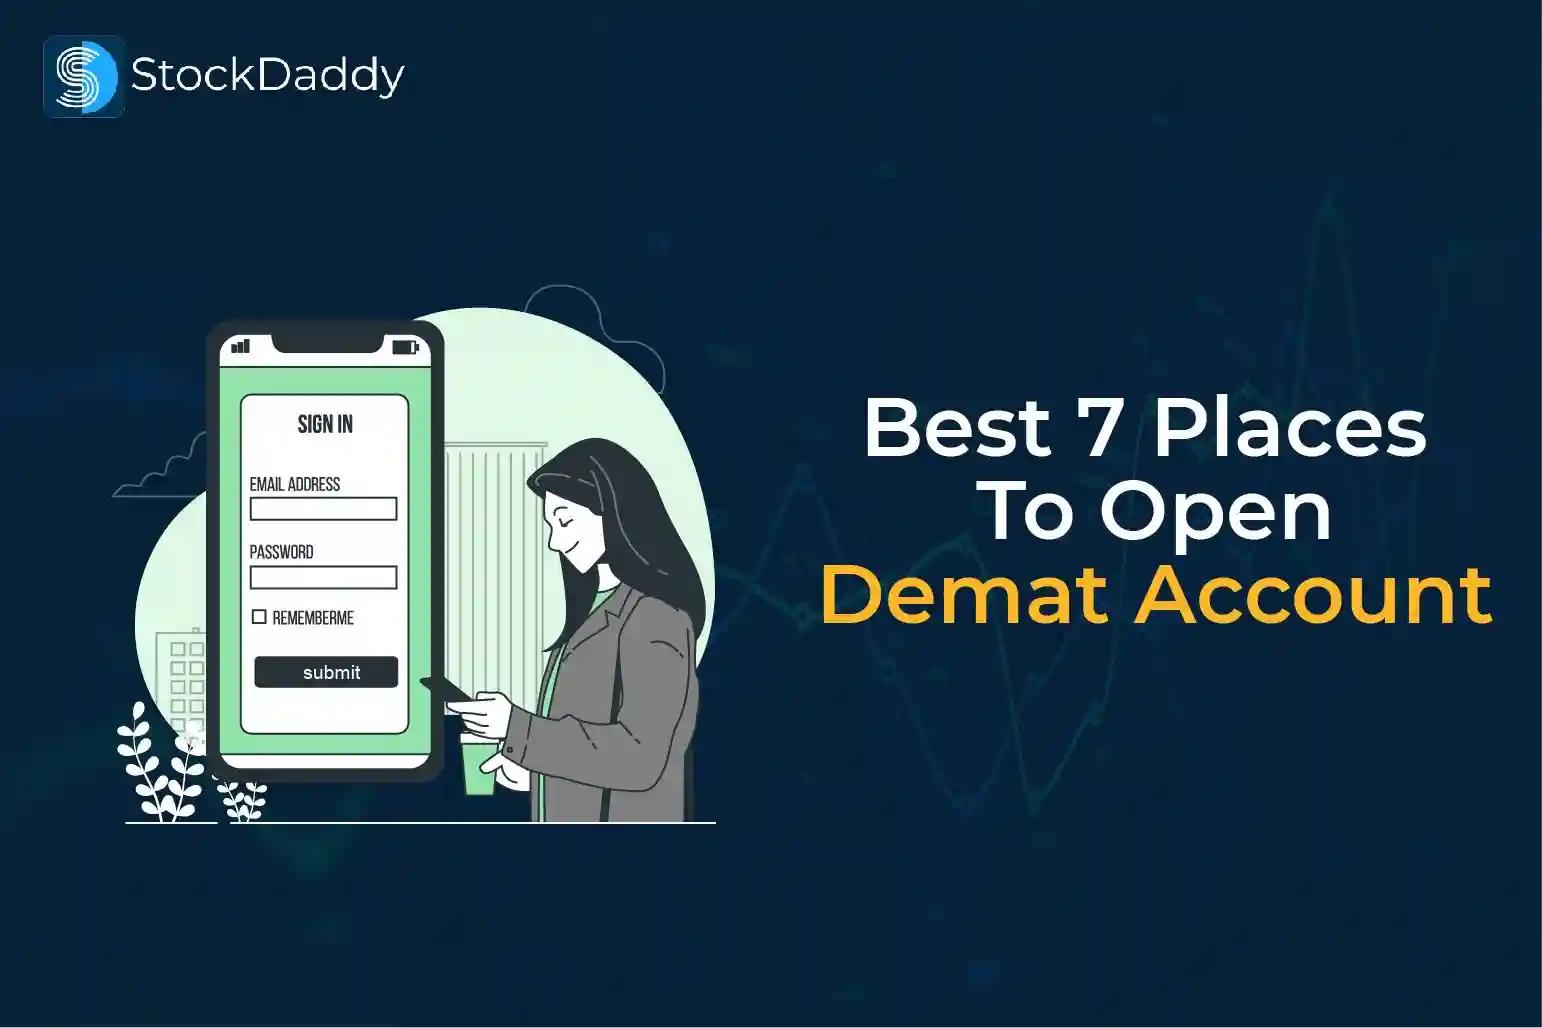 Best 7 places to open a Demat account